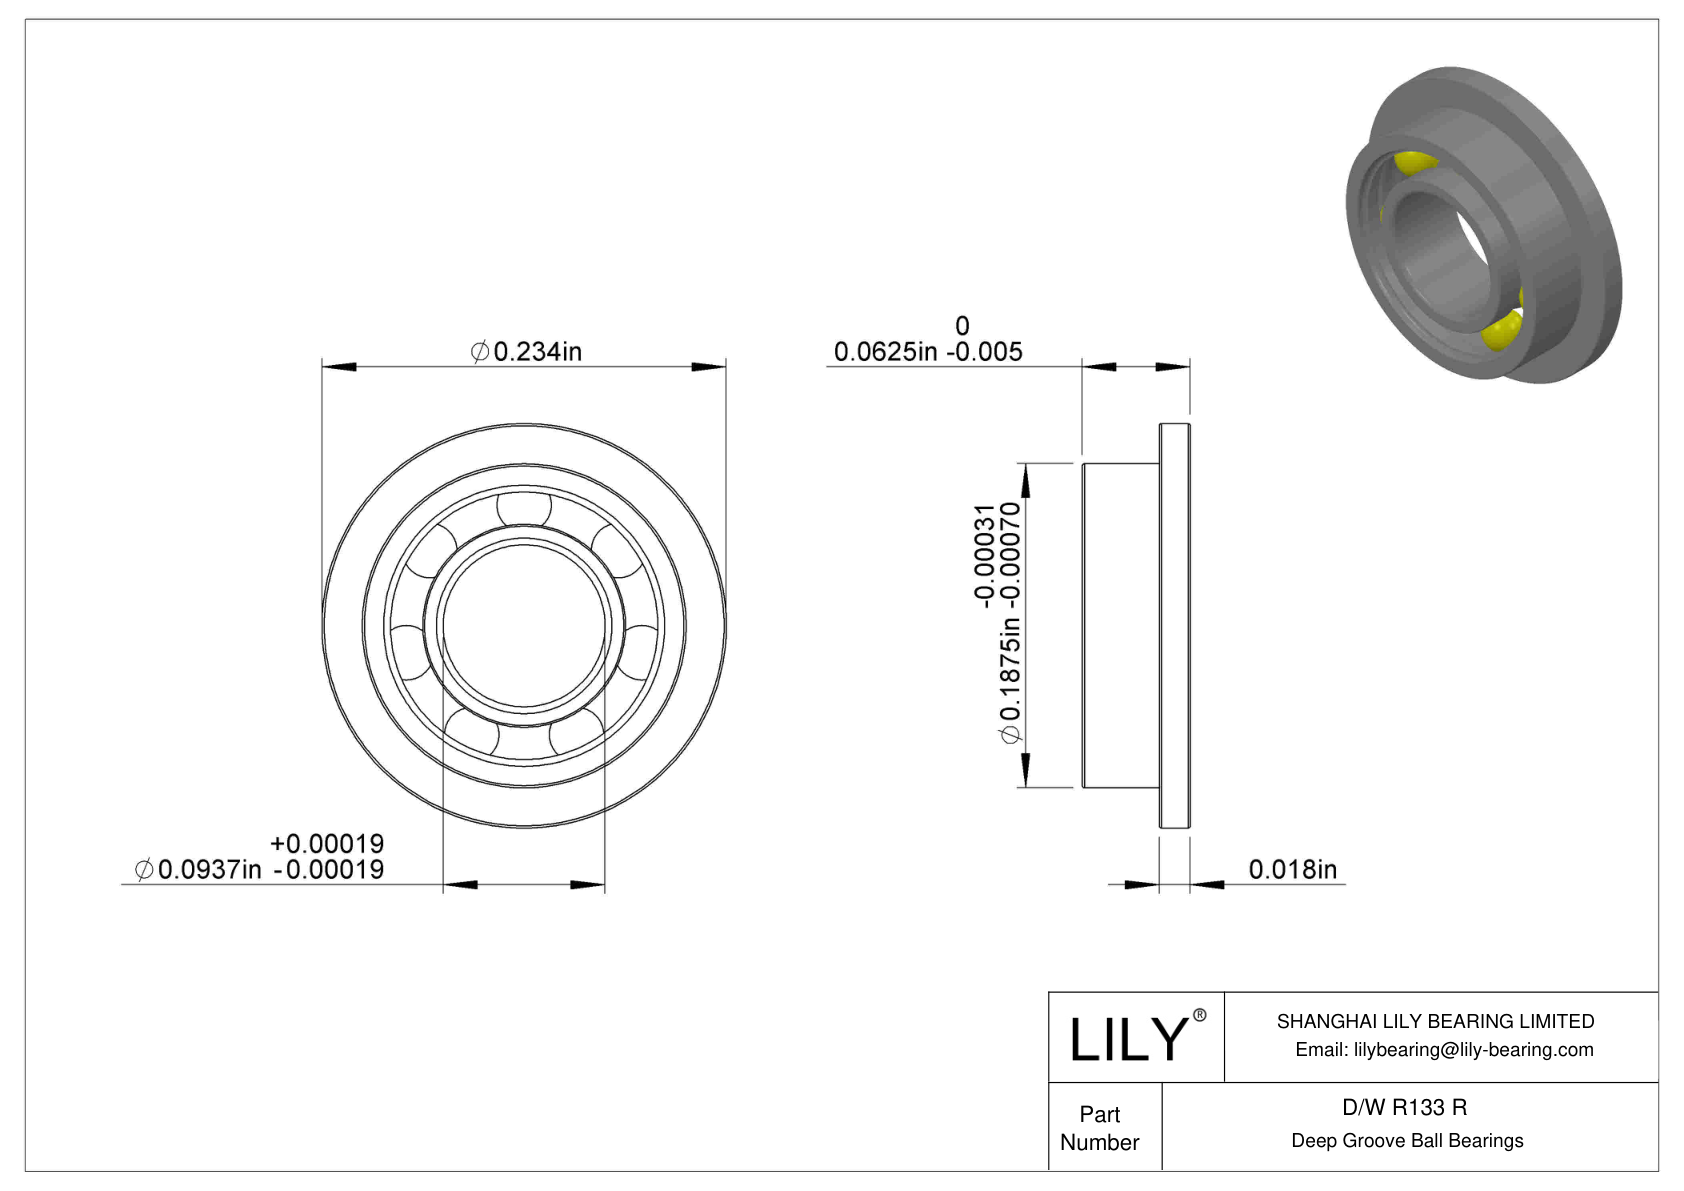 D/W R133 R Flanged Ball Bearings cad drawing